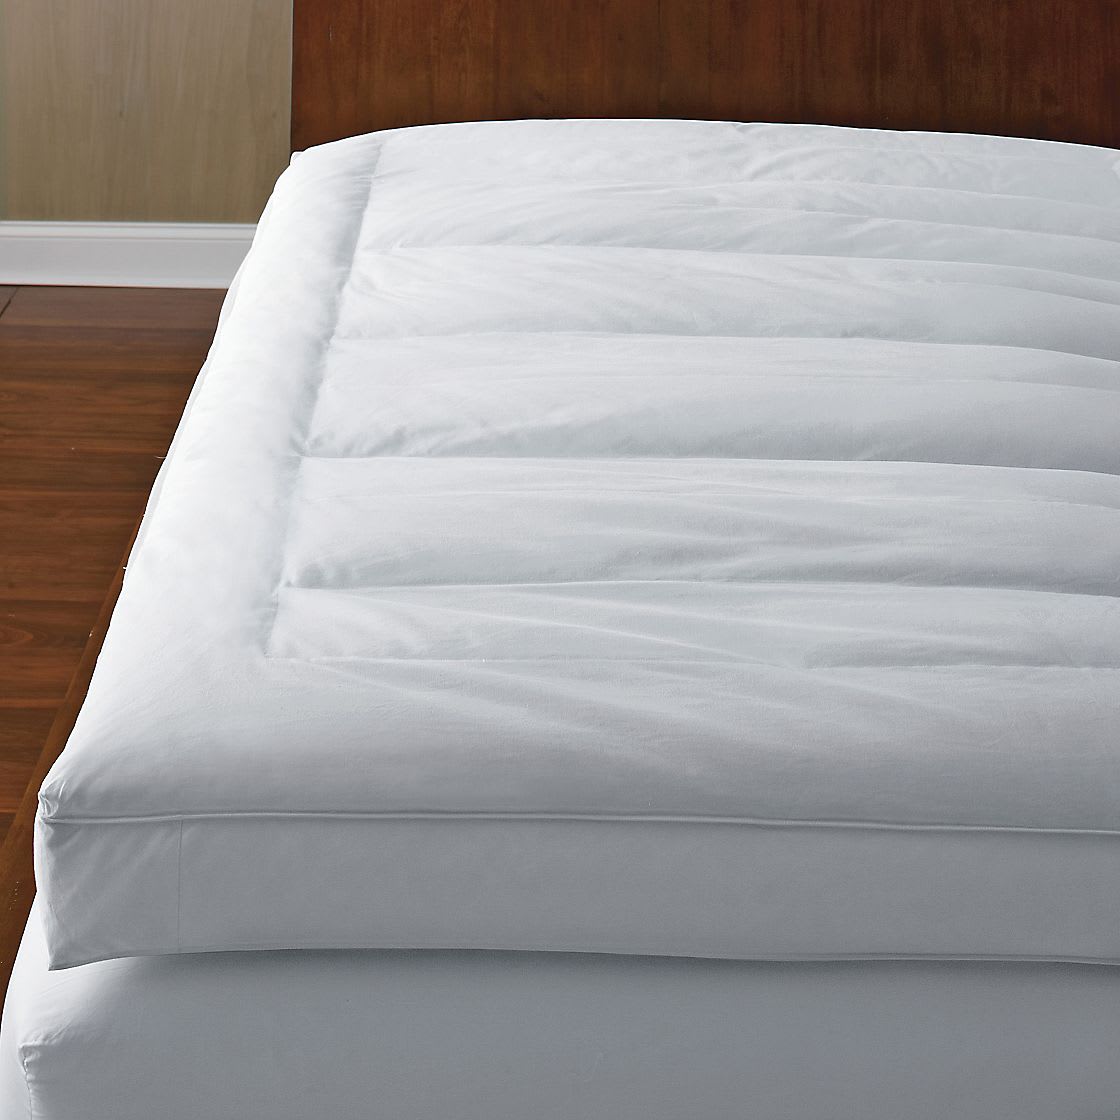 Pillowtop Featherbed The Company, Cal King Feather Bed Topper